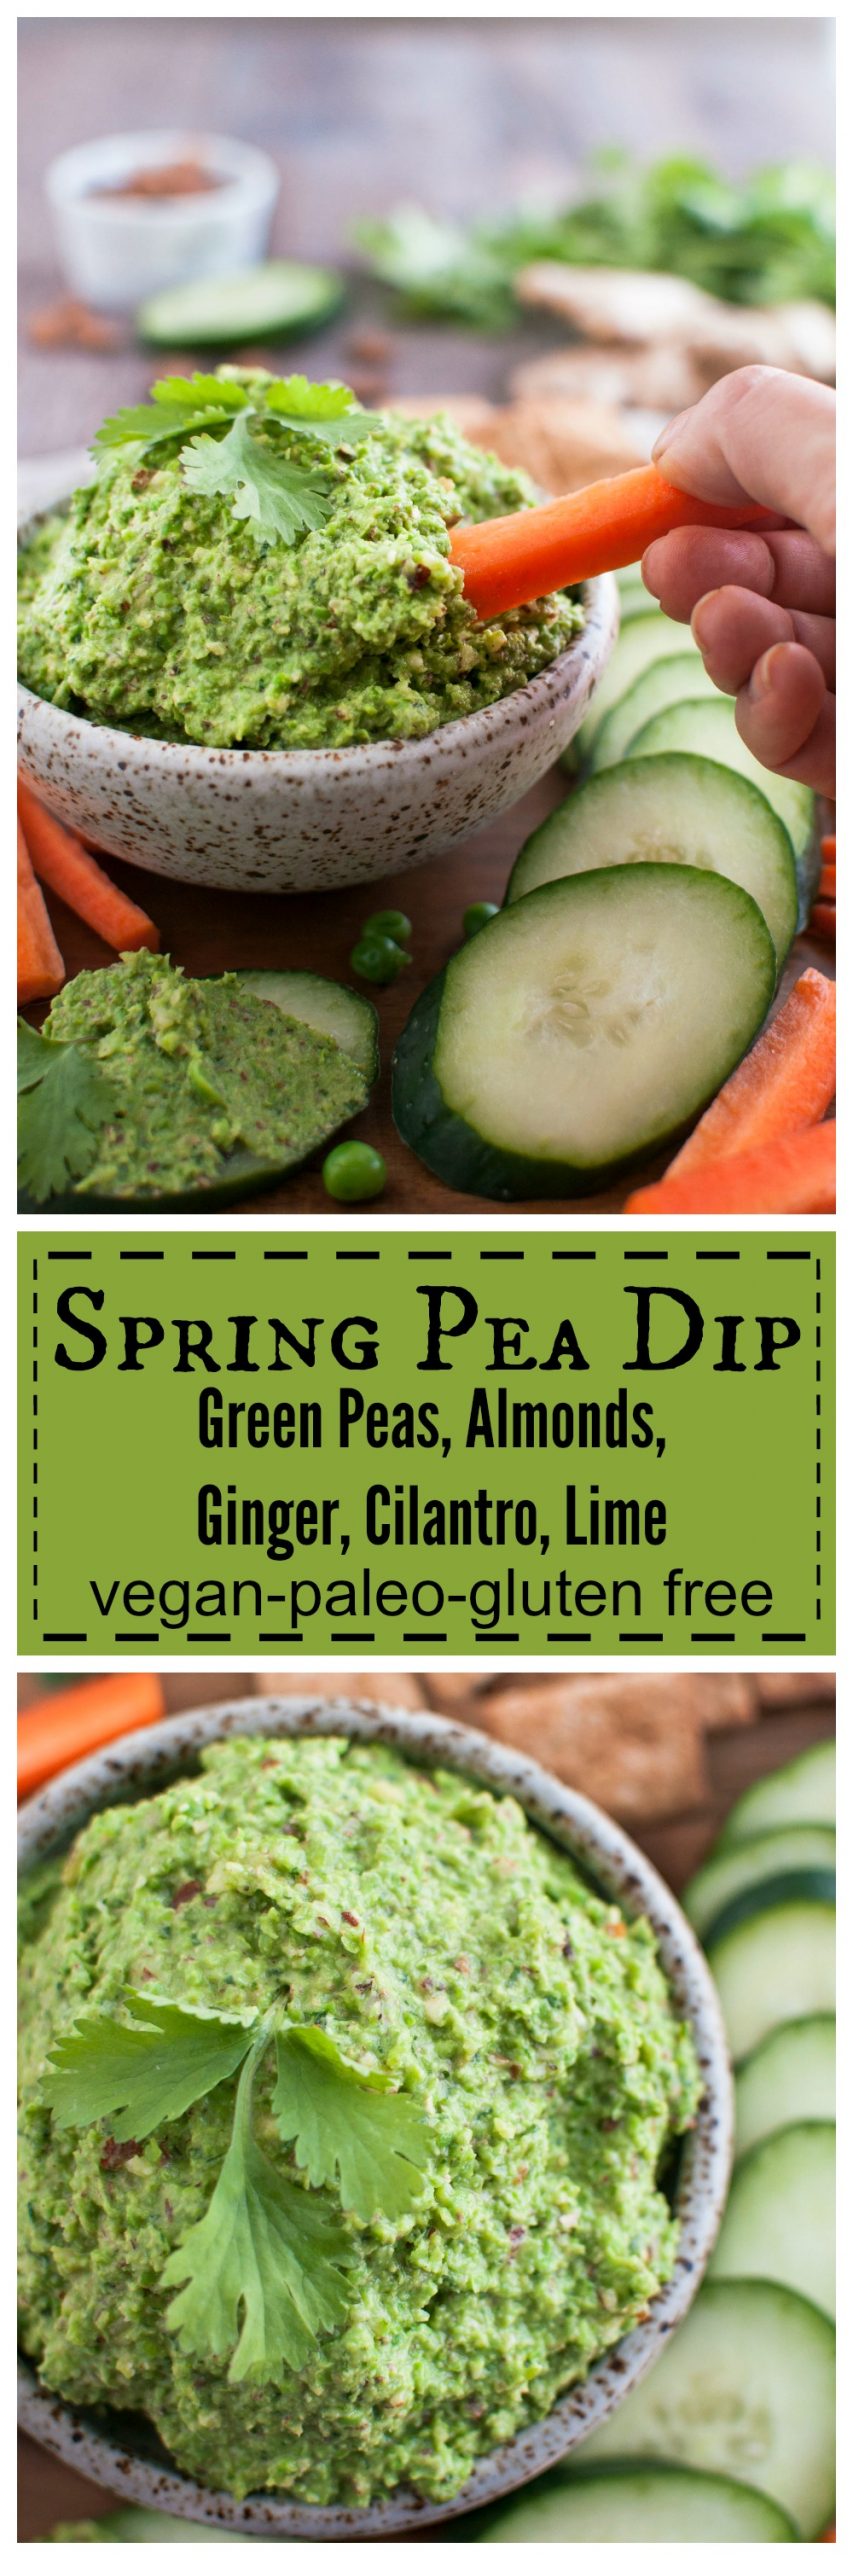 Spring Pea Dip with Almonds, Ginger, and Cilantro - The Organic Dietitian